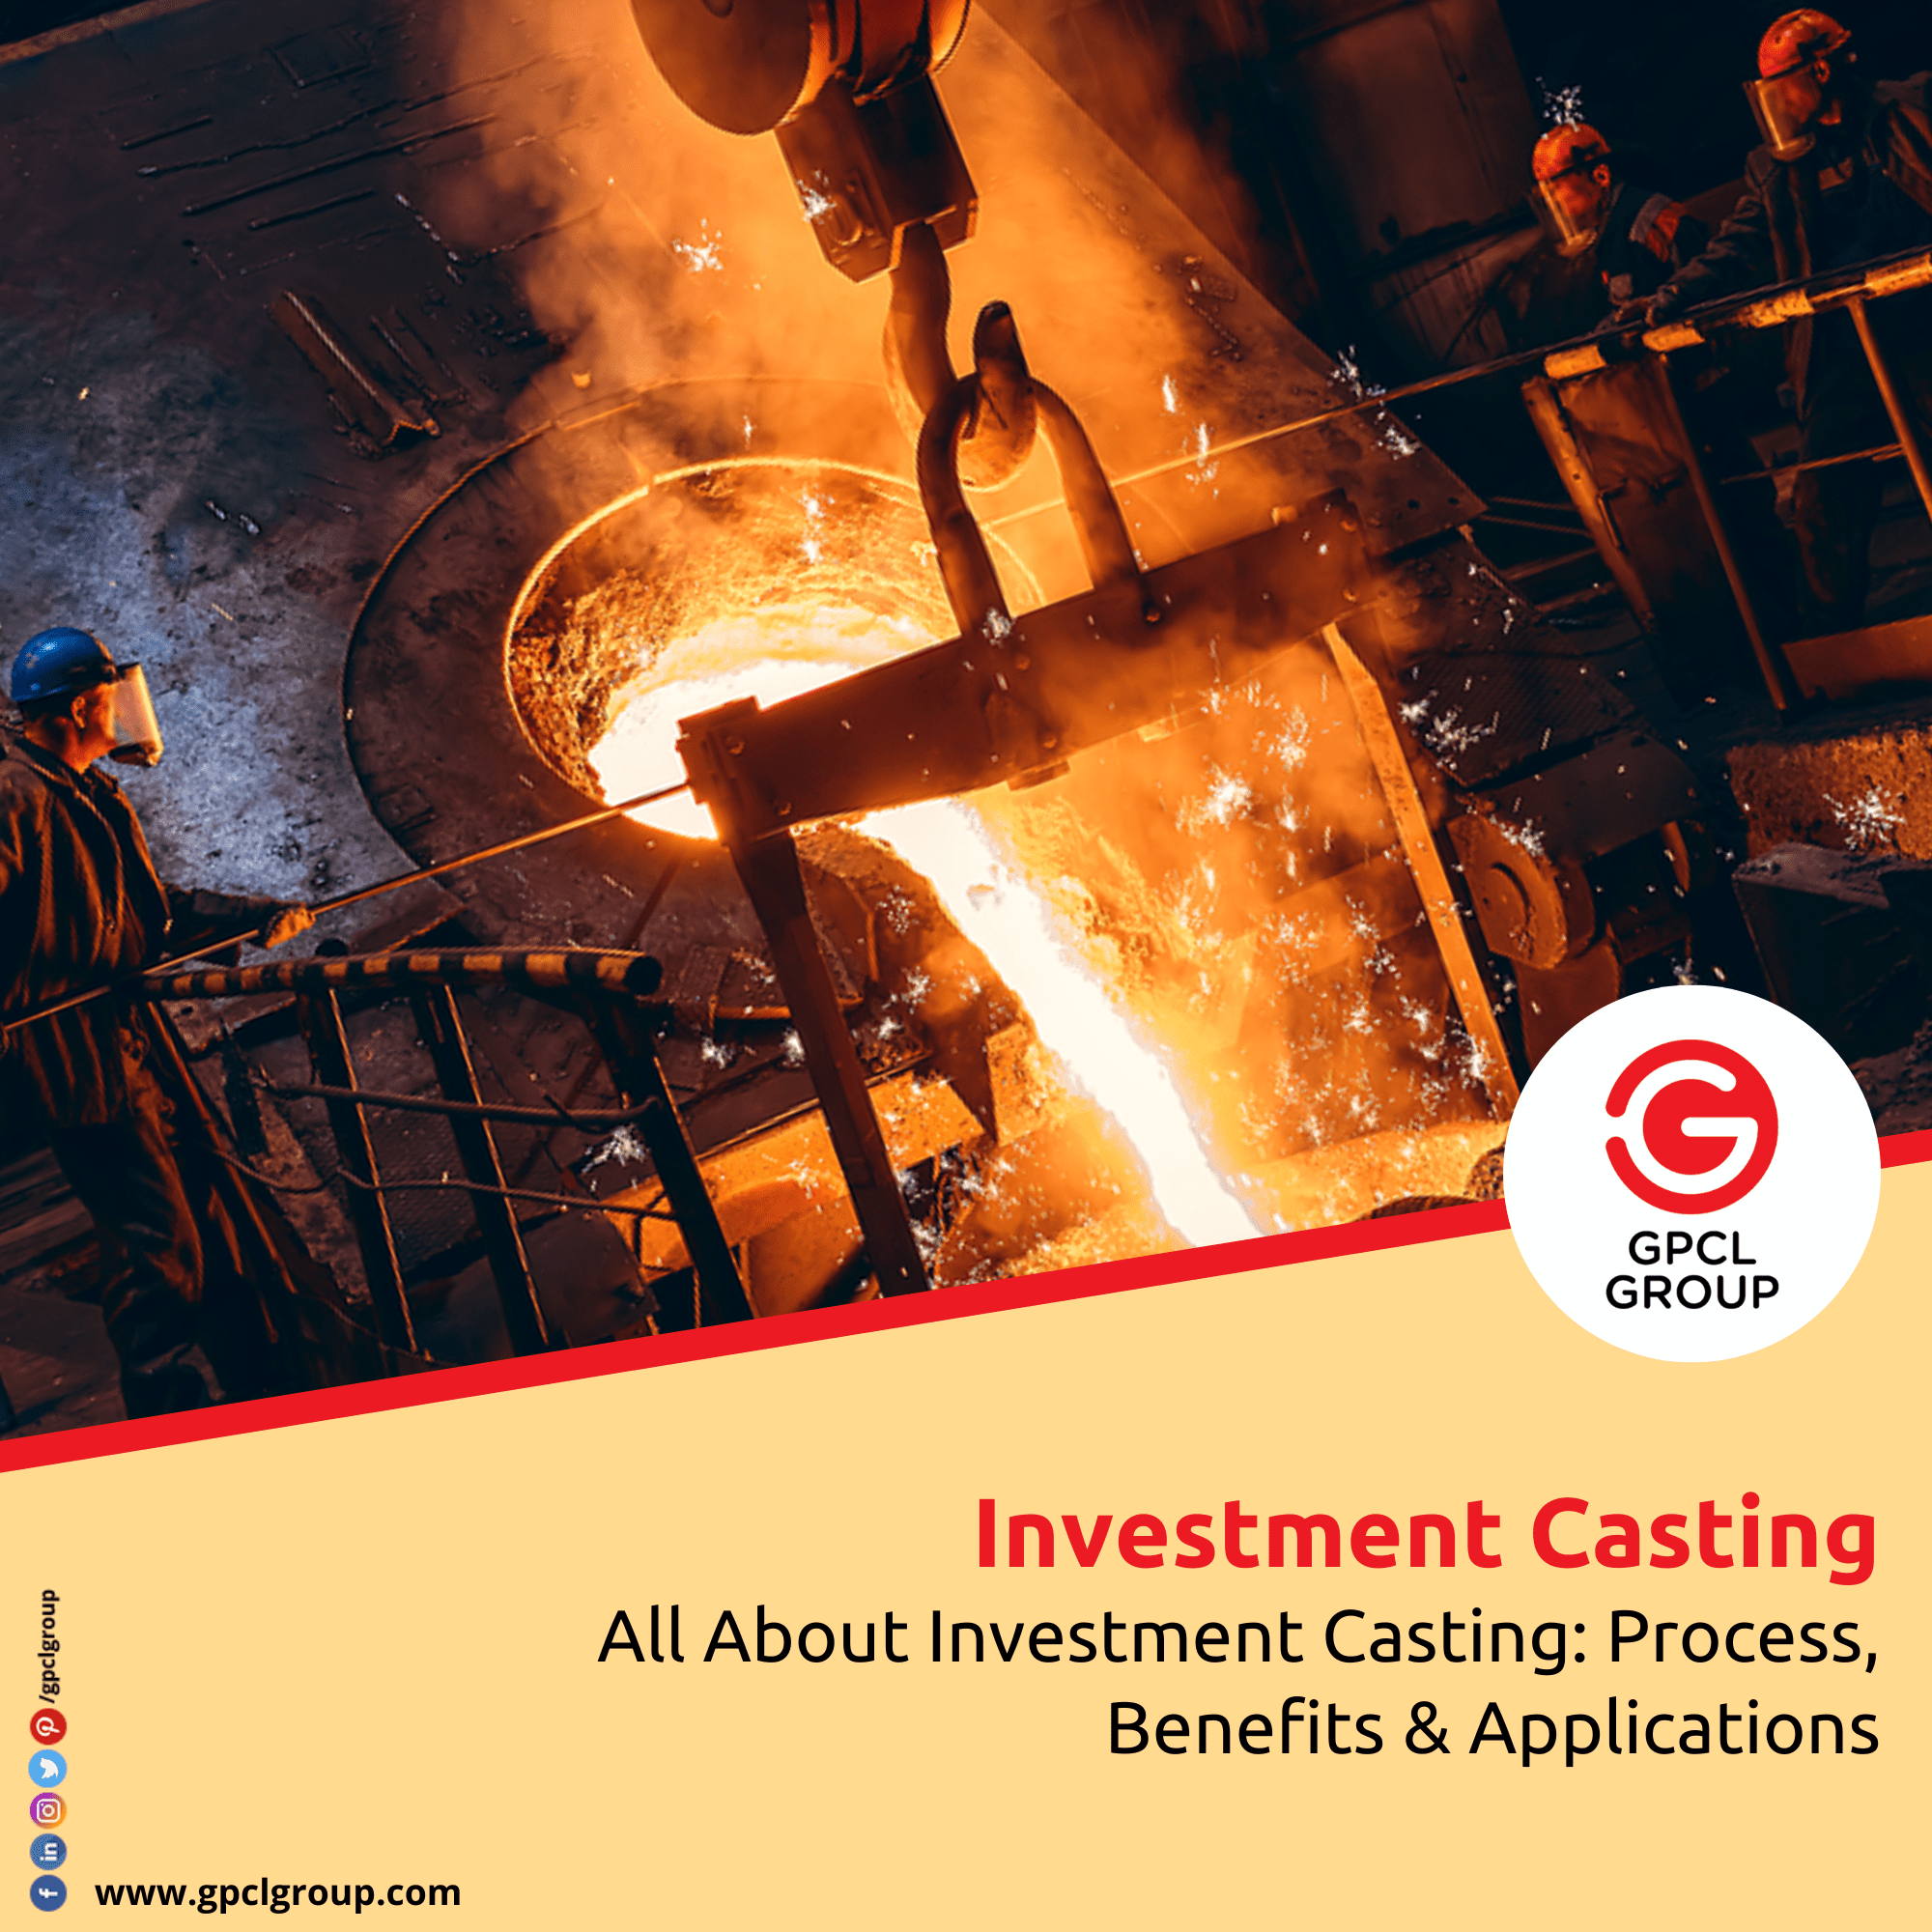 All About Investment Casting - Process, Benefits & Applications